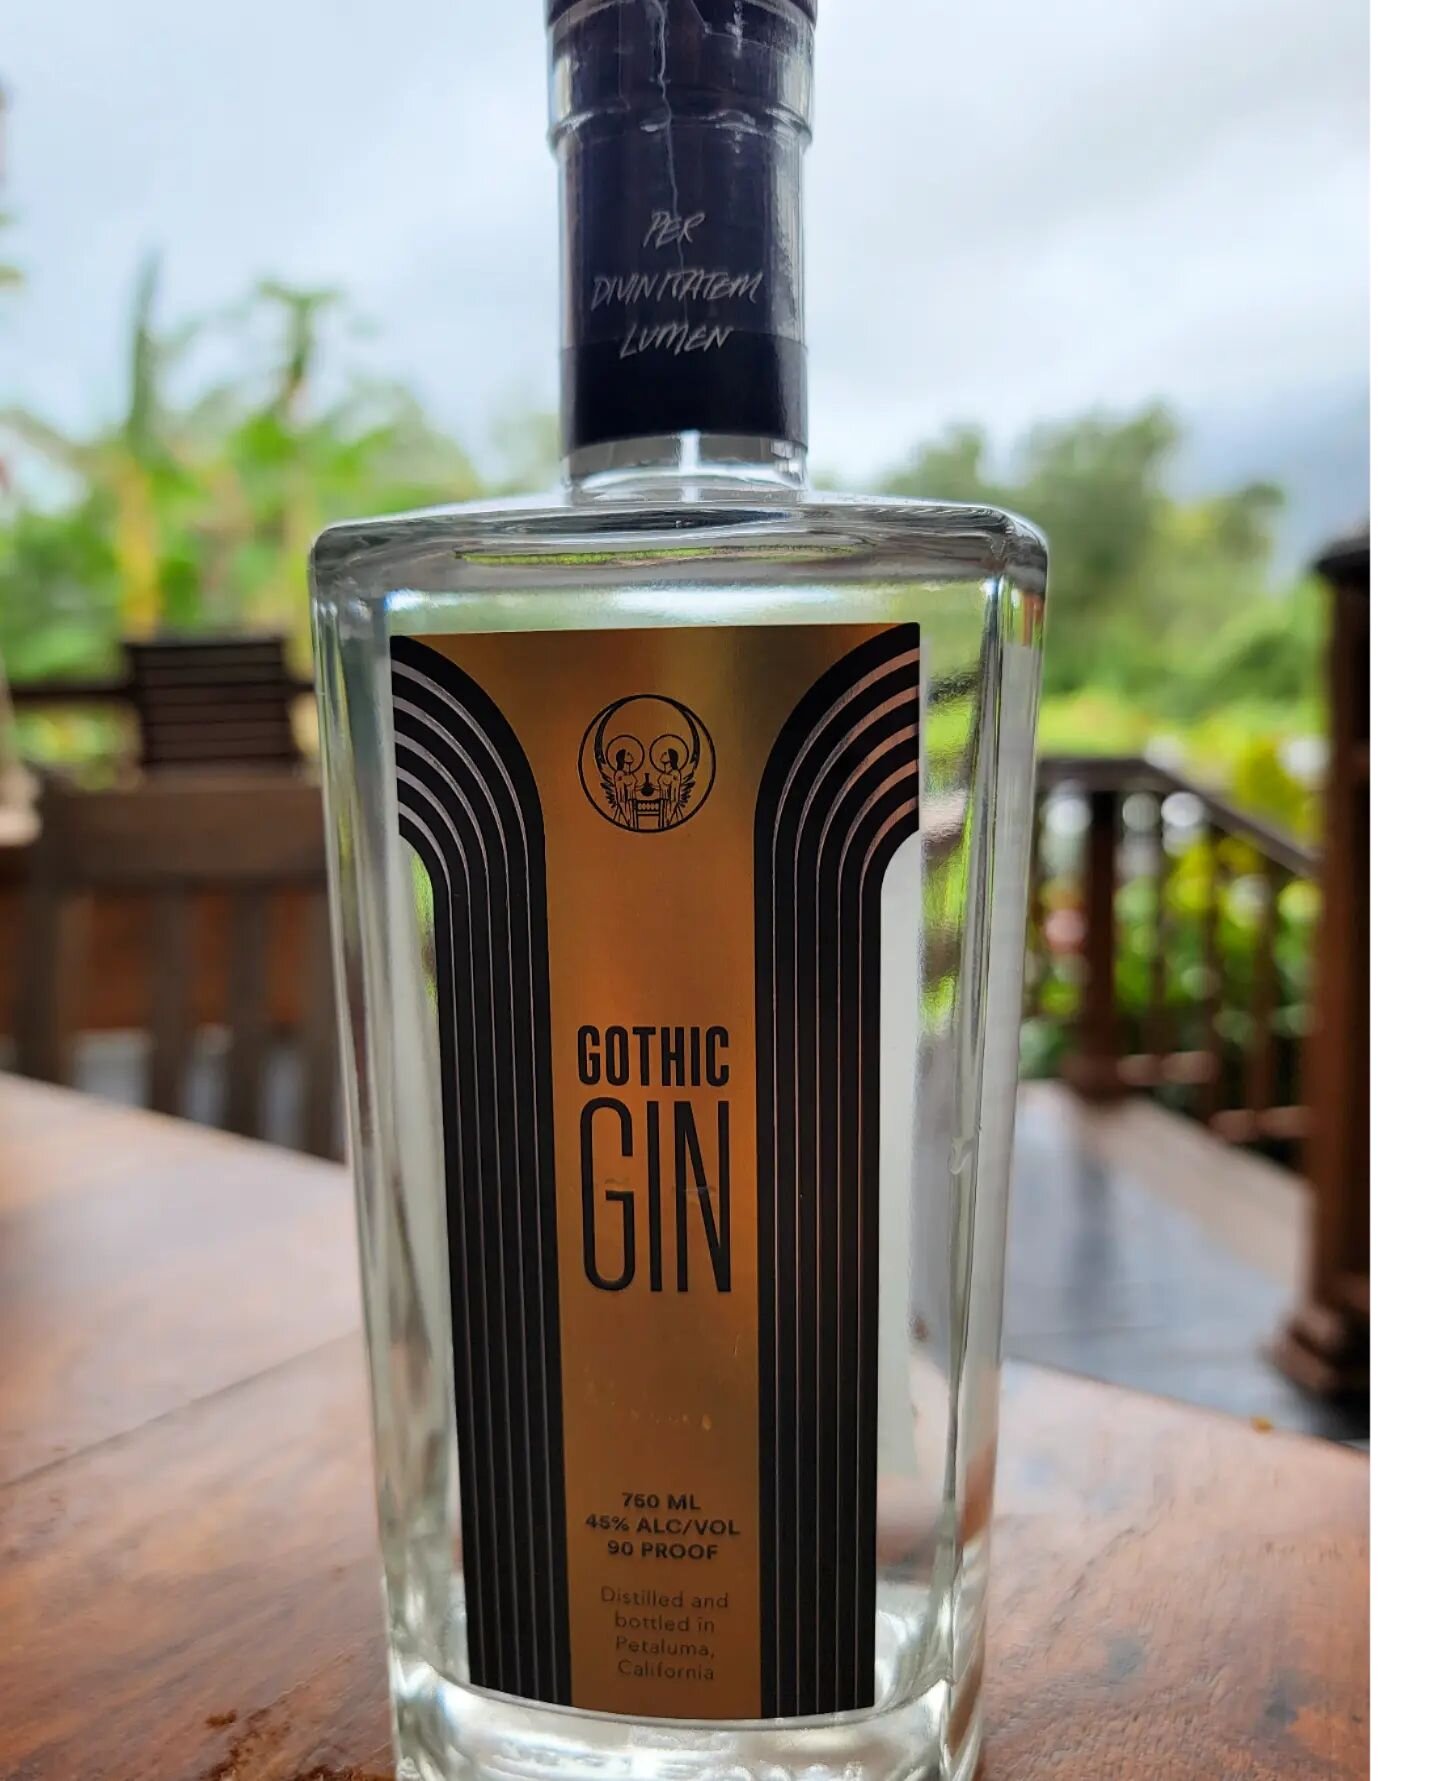 The taste of Gothic Gin delivers distinct, clean botanicals. It takes you on a journey to Barcelona, Spain and captures the spirit of the Gothic Quarter. The bouquet conjures a lively fragrant nightlife, while the taste invites a subtle, relaxed fini